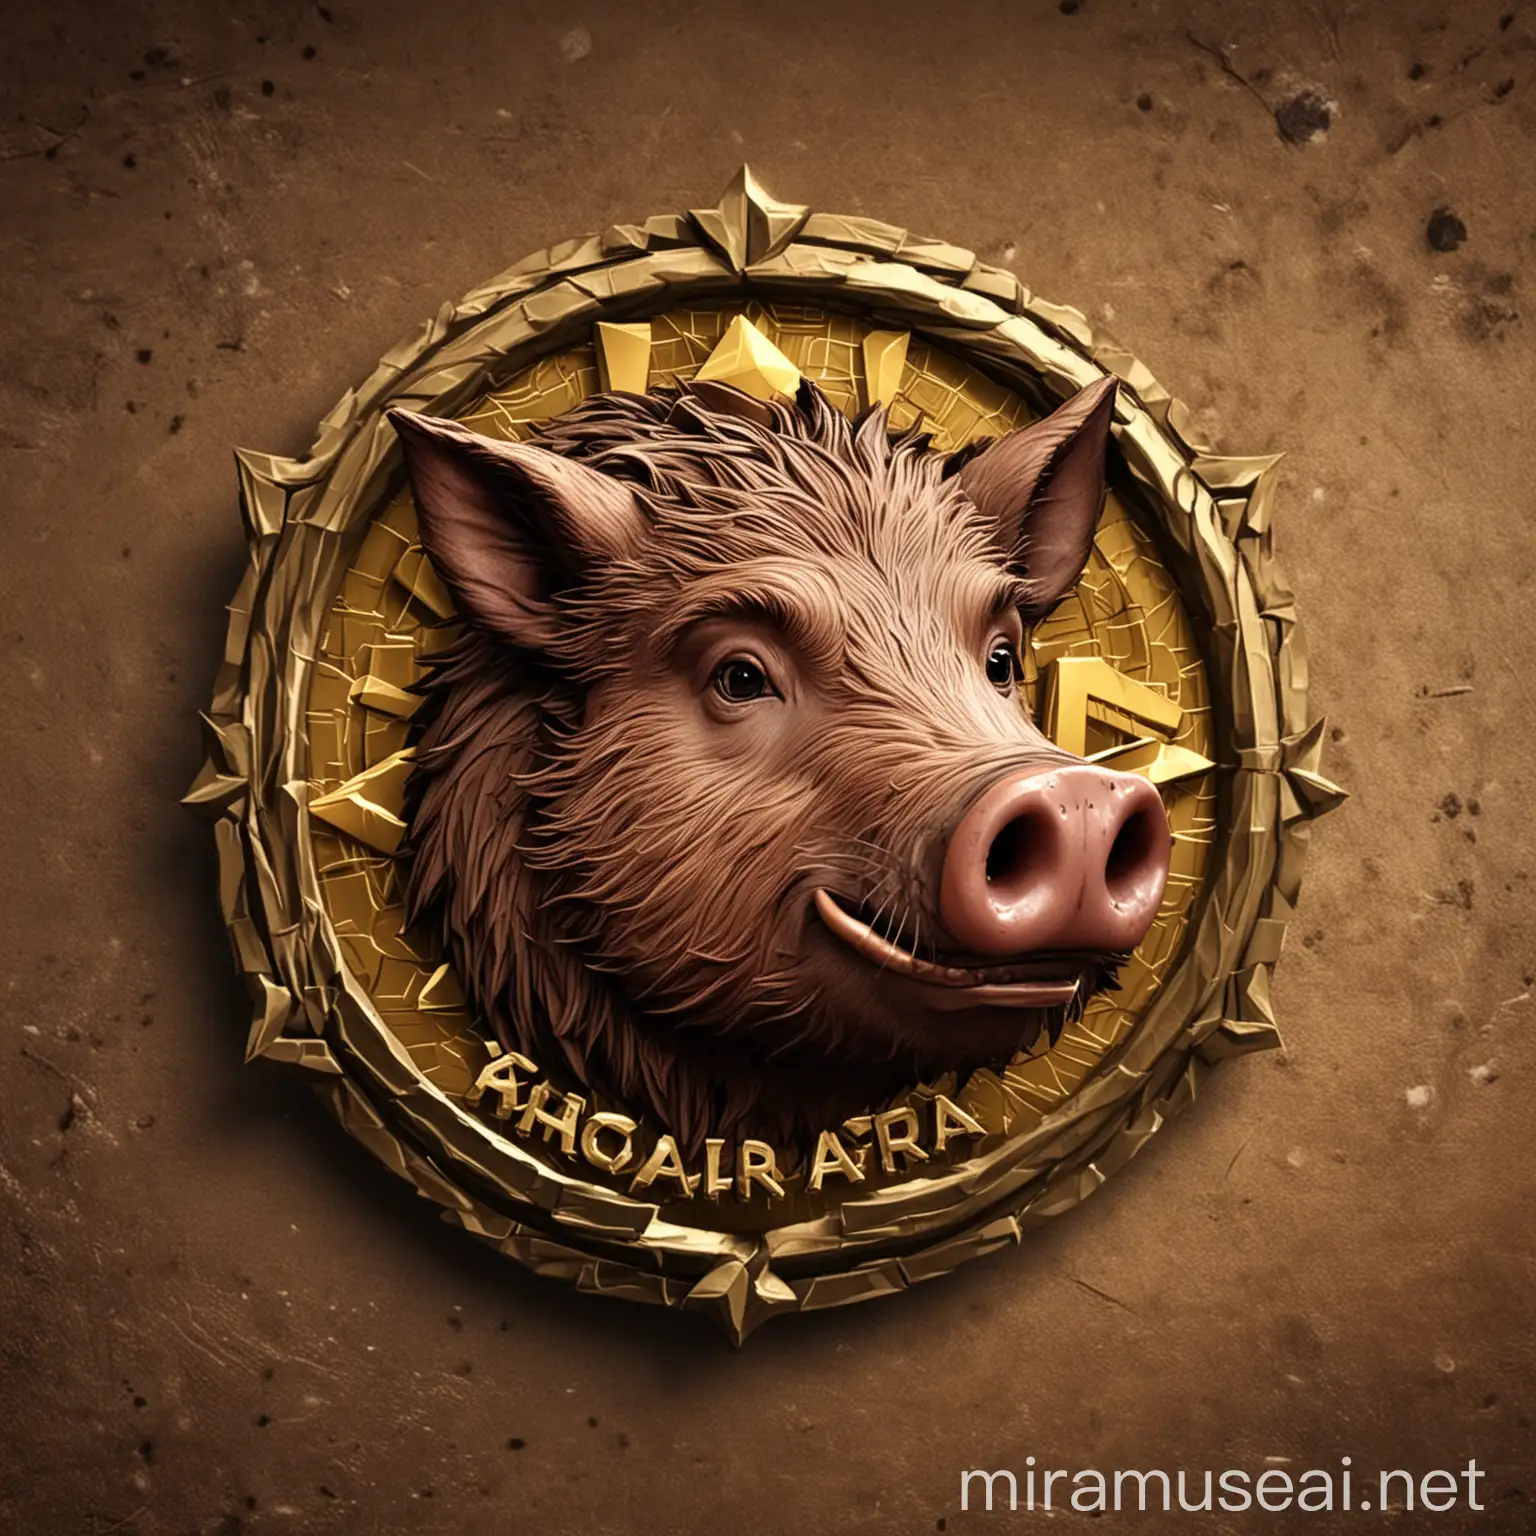 Make a logo for the channel, which will depict a boar with cryptocurrency.  Make it very realistic. Make a realistichttps://miramuseai.net/_next/static/media/image-ico.d7252070.svg boar and cryptocurrency. Make a very beautiful and unusual logo.